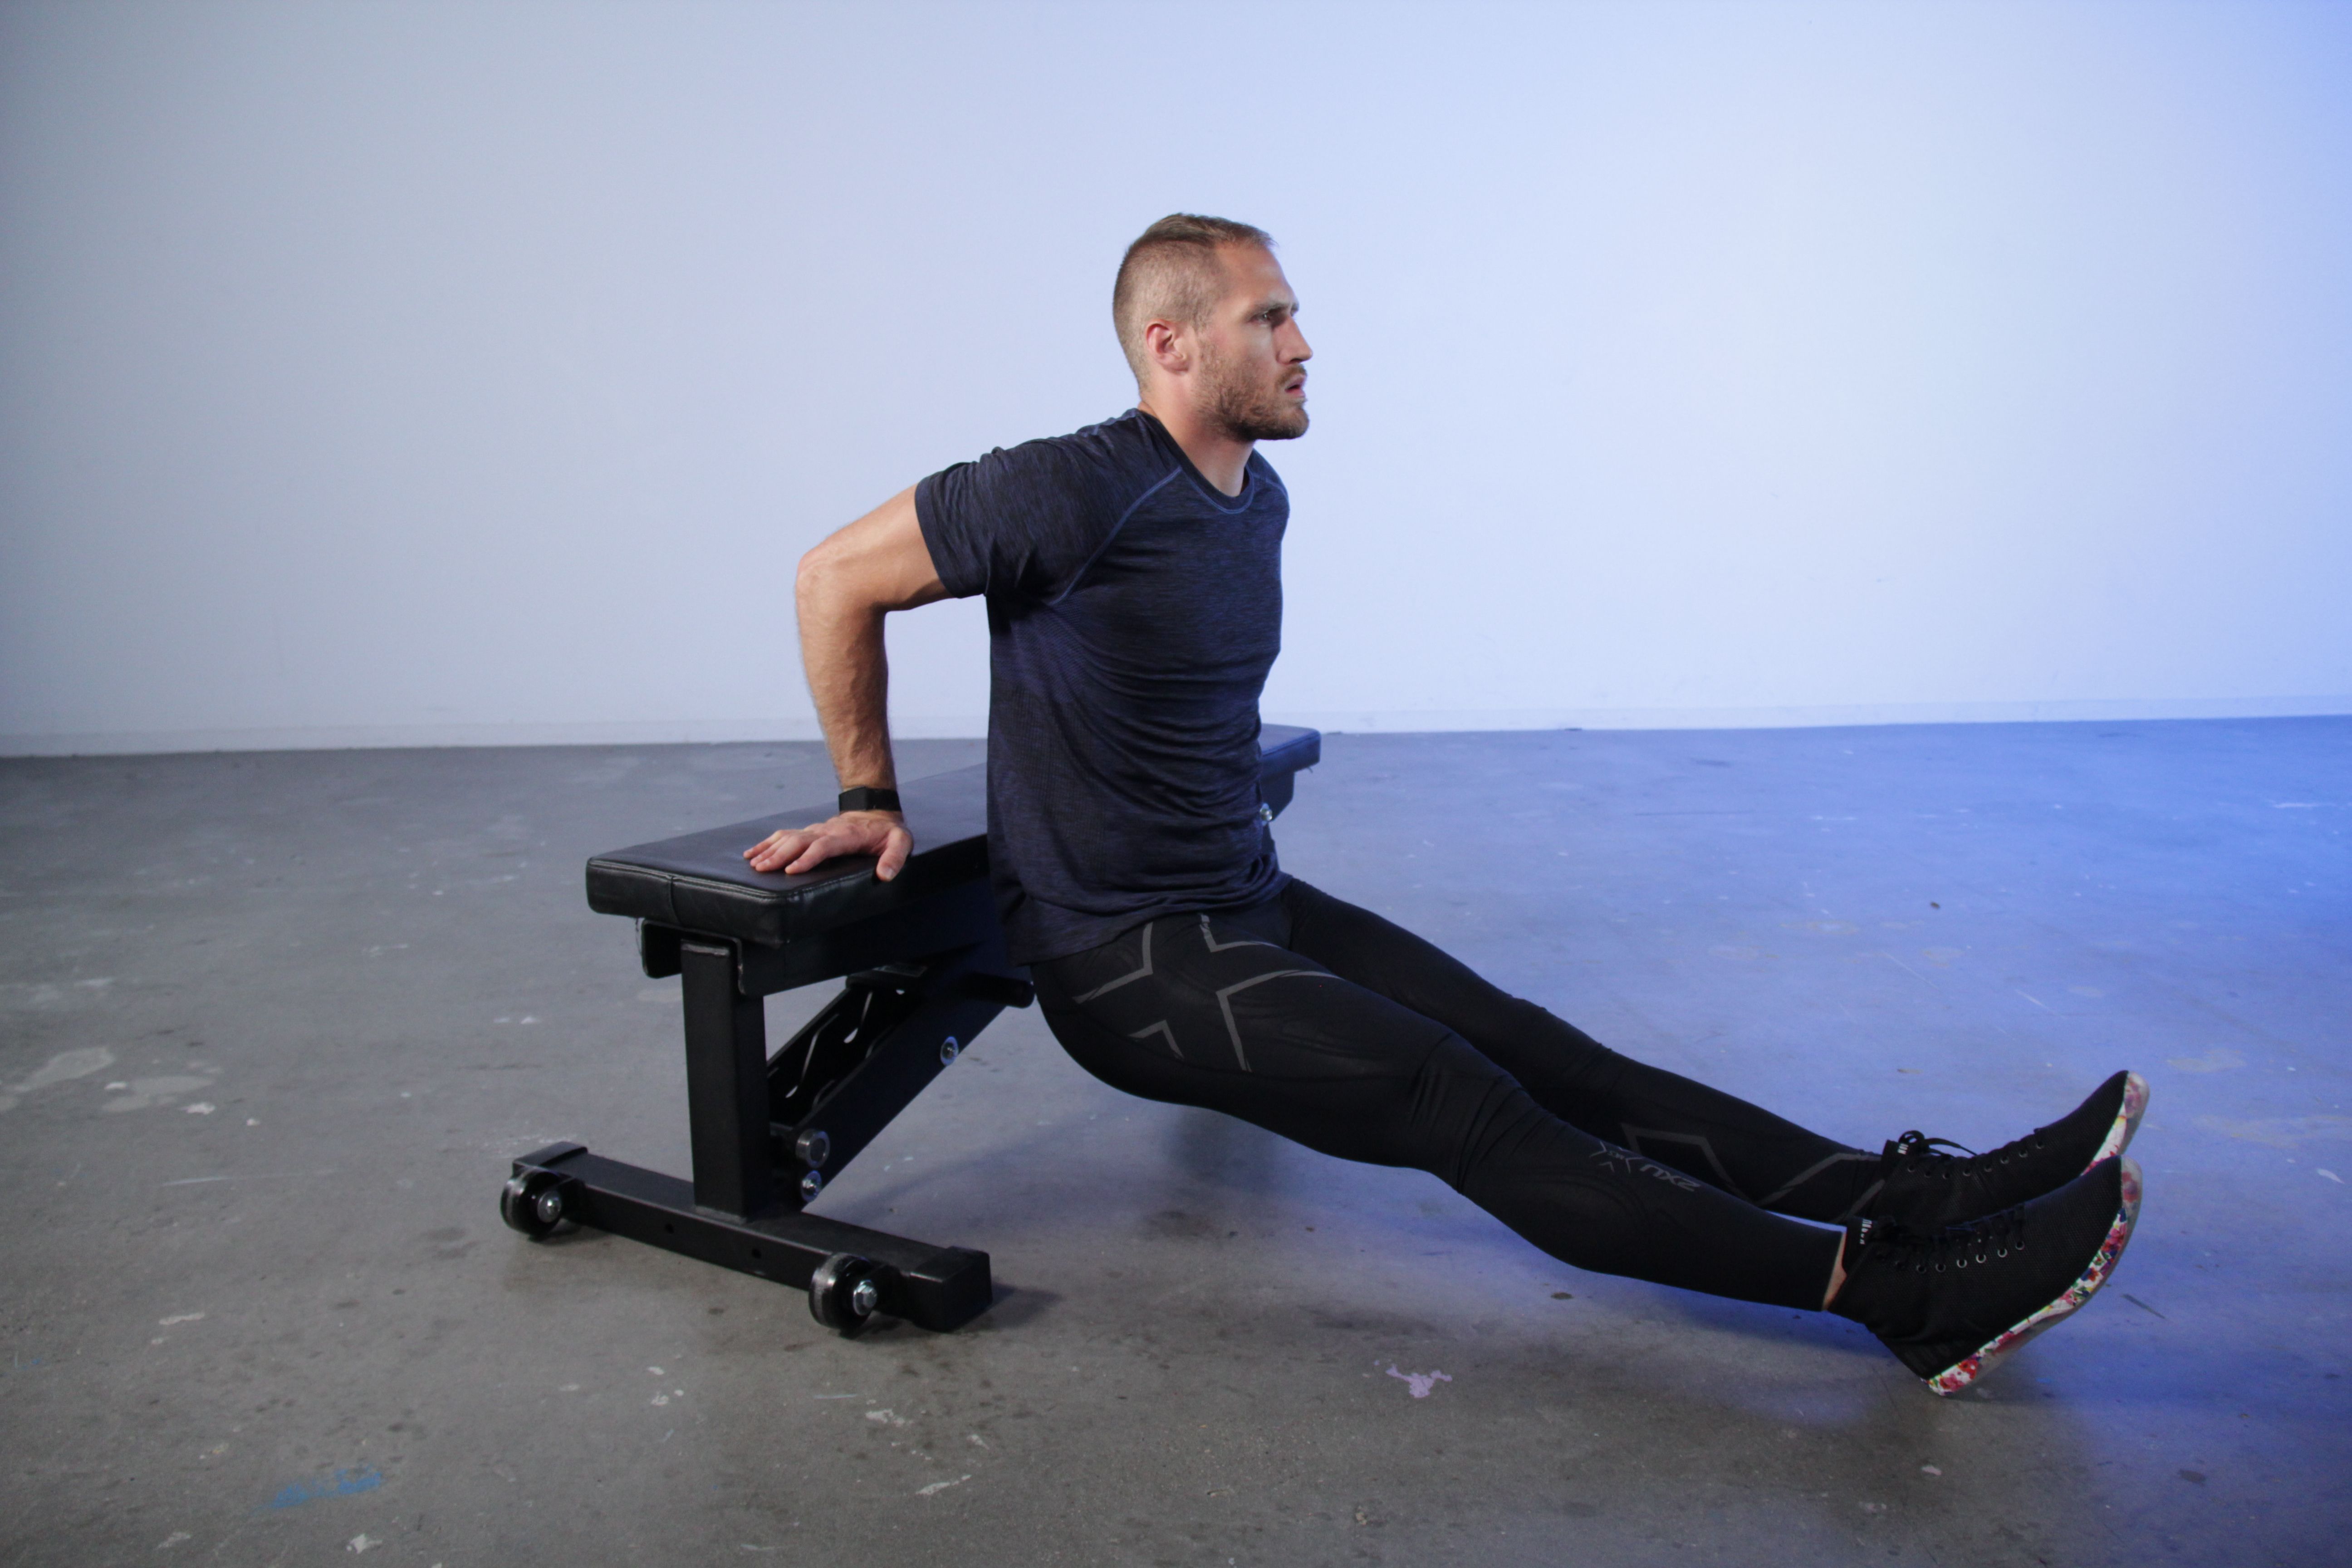 How To Do Bench Dips To Pack On Triceps Muscle In Your Workout